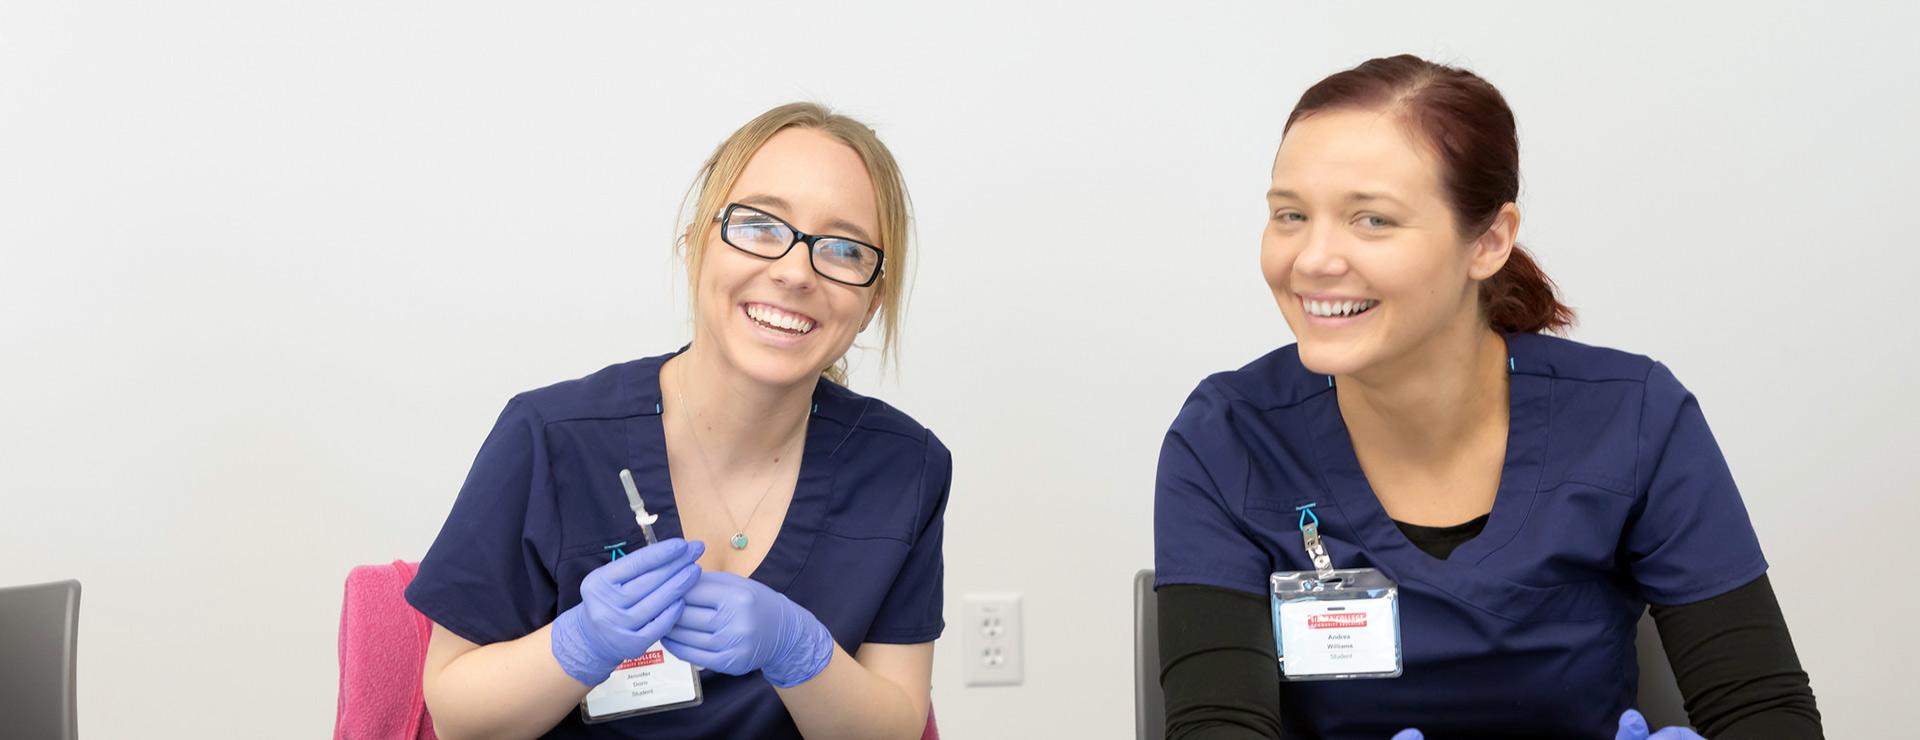 Two smiling female phlebotomy students wearing scrubs